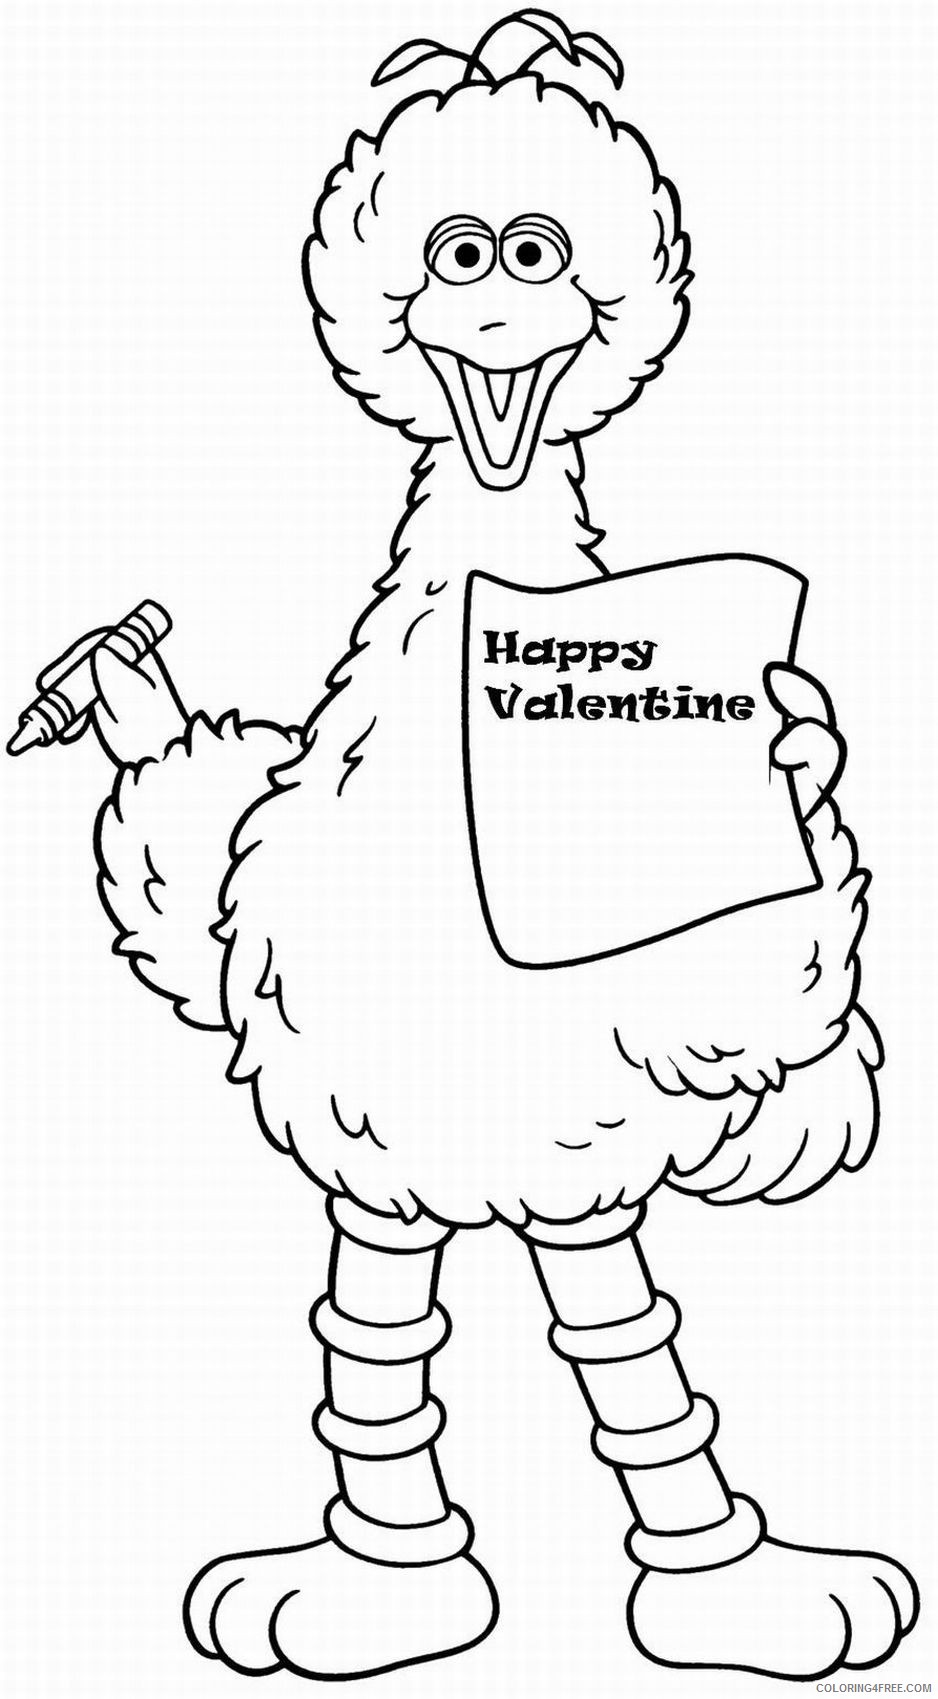 sesame street coloring pages big bird valentine Coloring4free